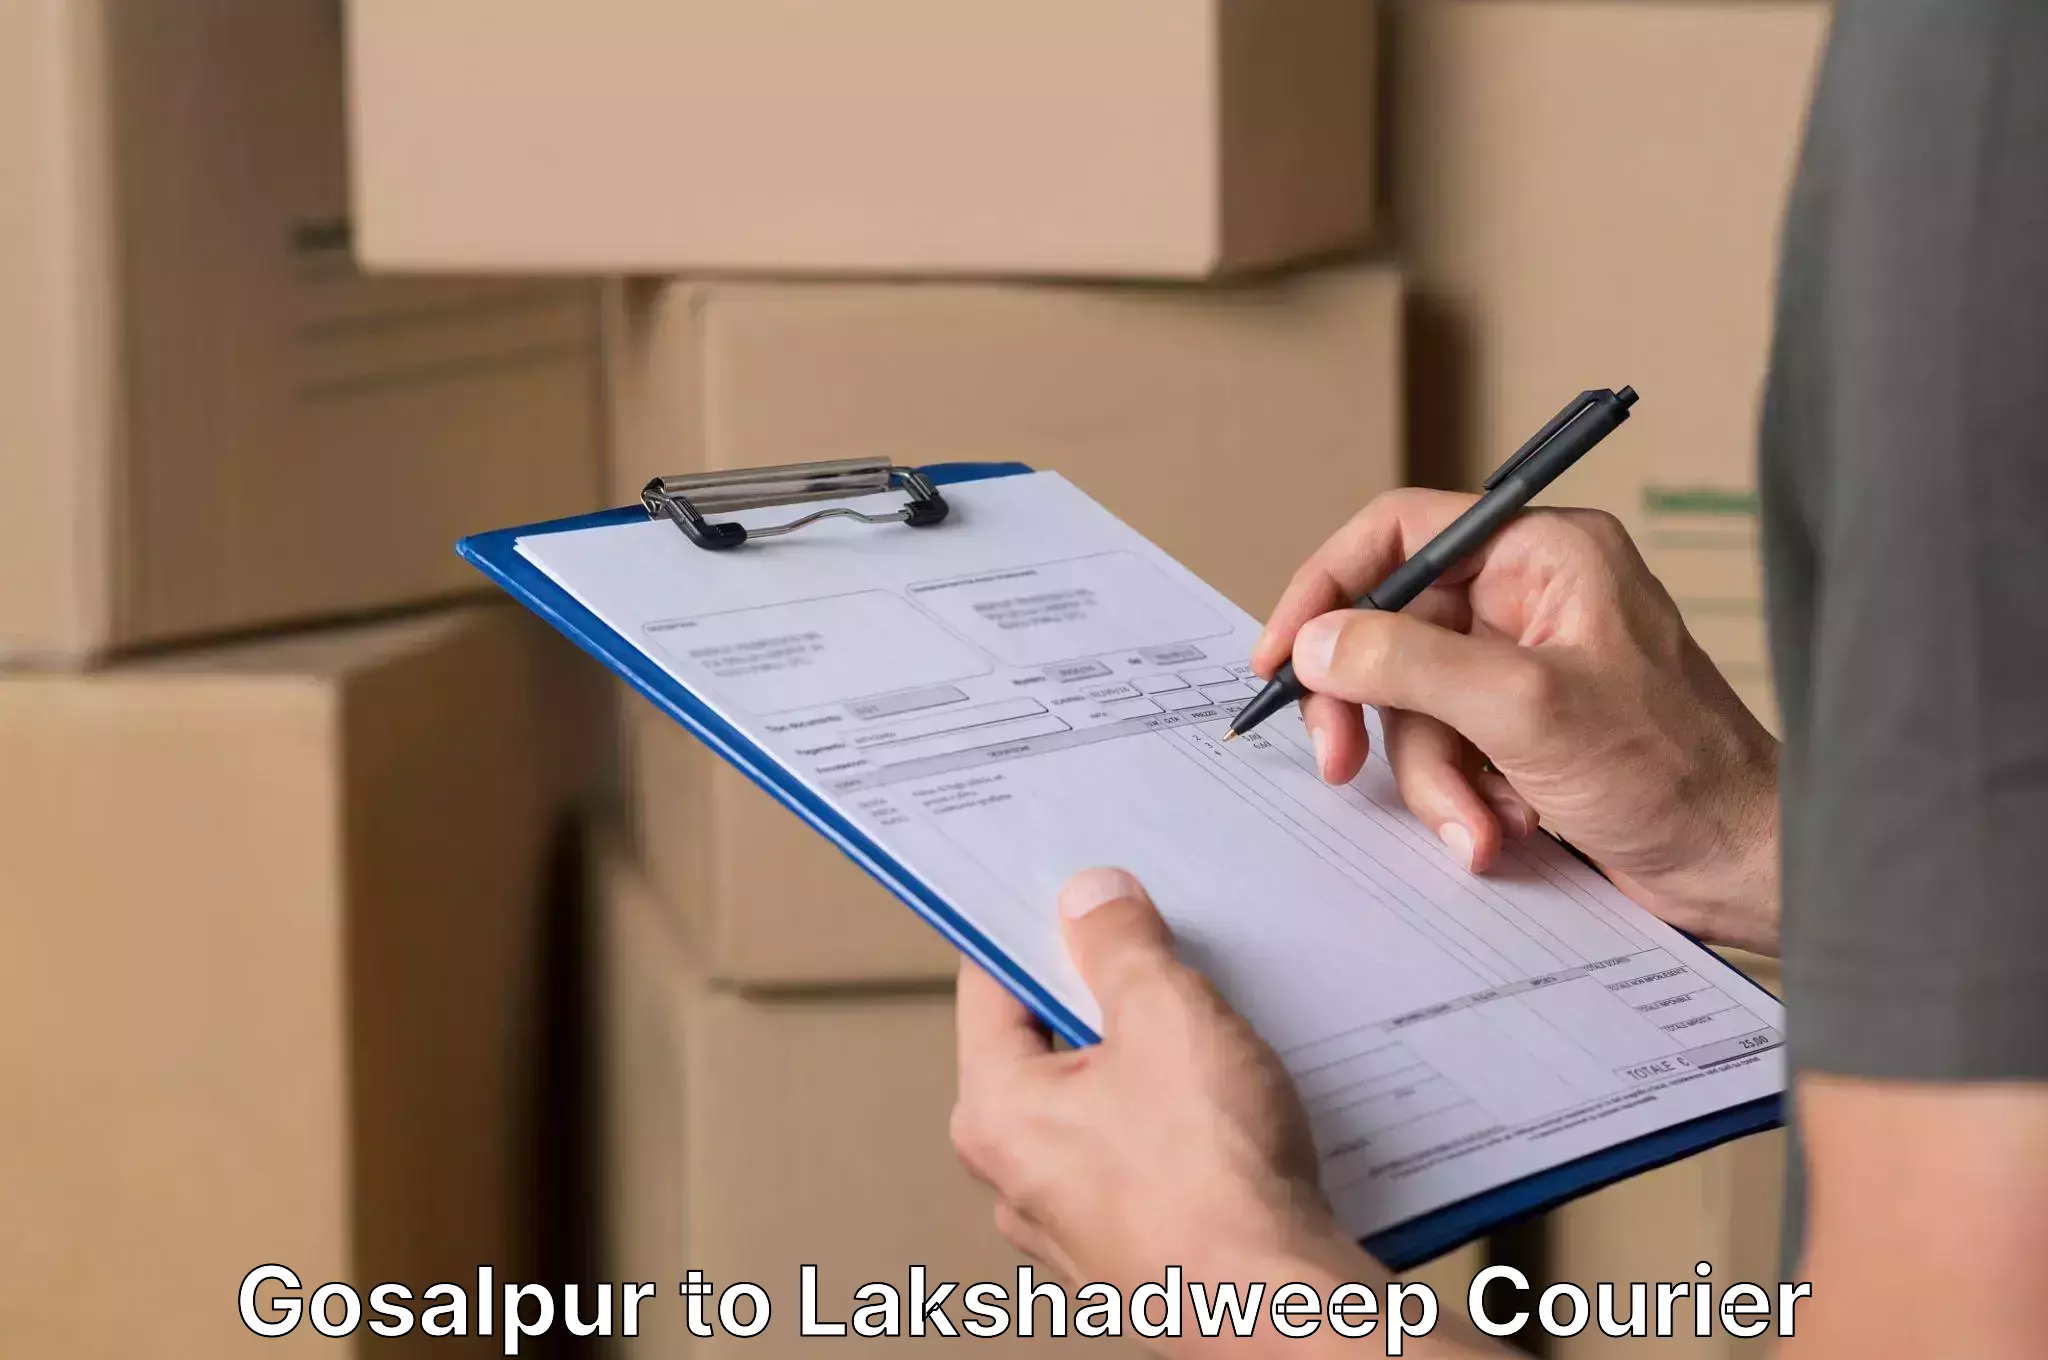 Moving and storage services Gosalpur to Lakshadweep